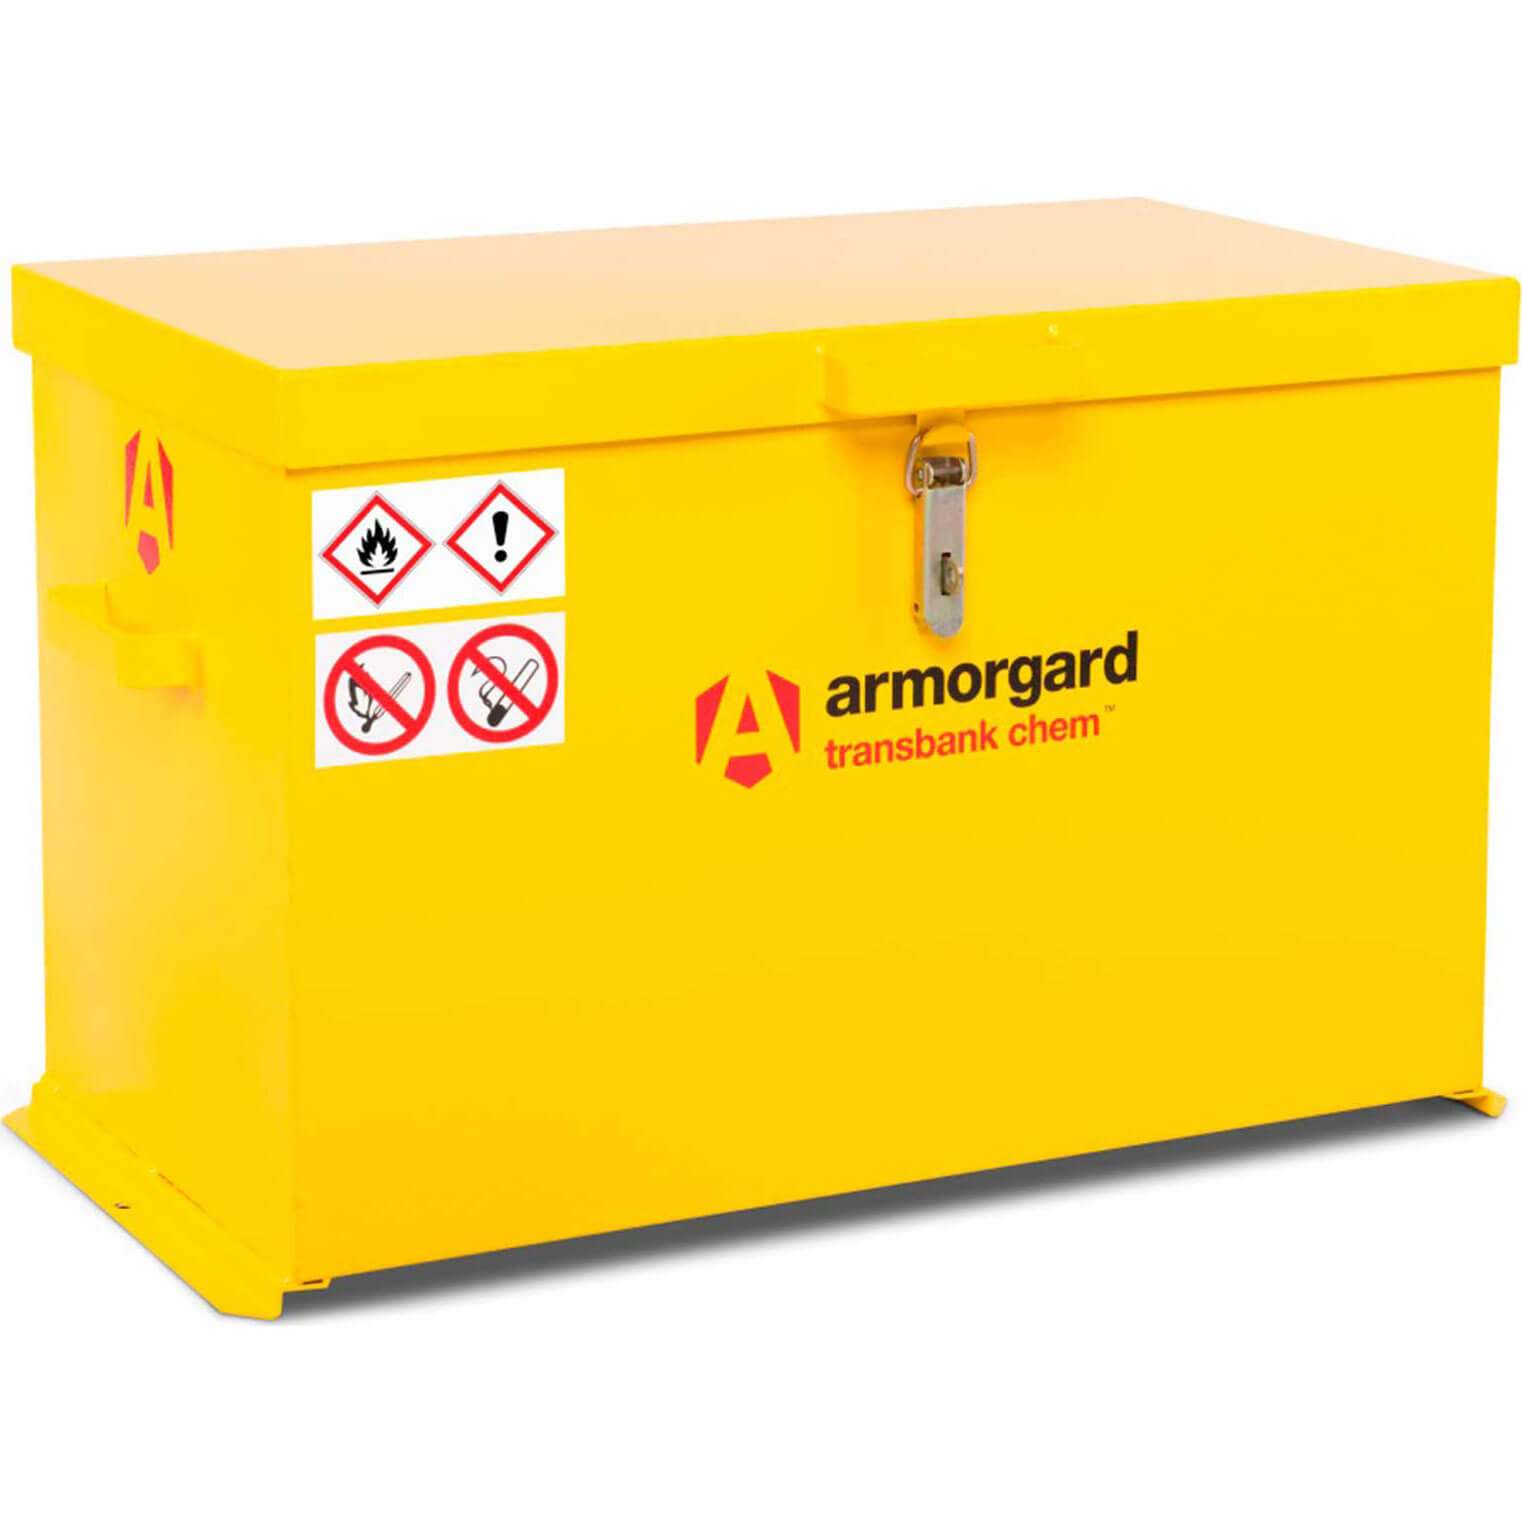 Image of Armorgard Transbank Chem Chemicals Secure Storage Box 880mm 485mm 540mm